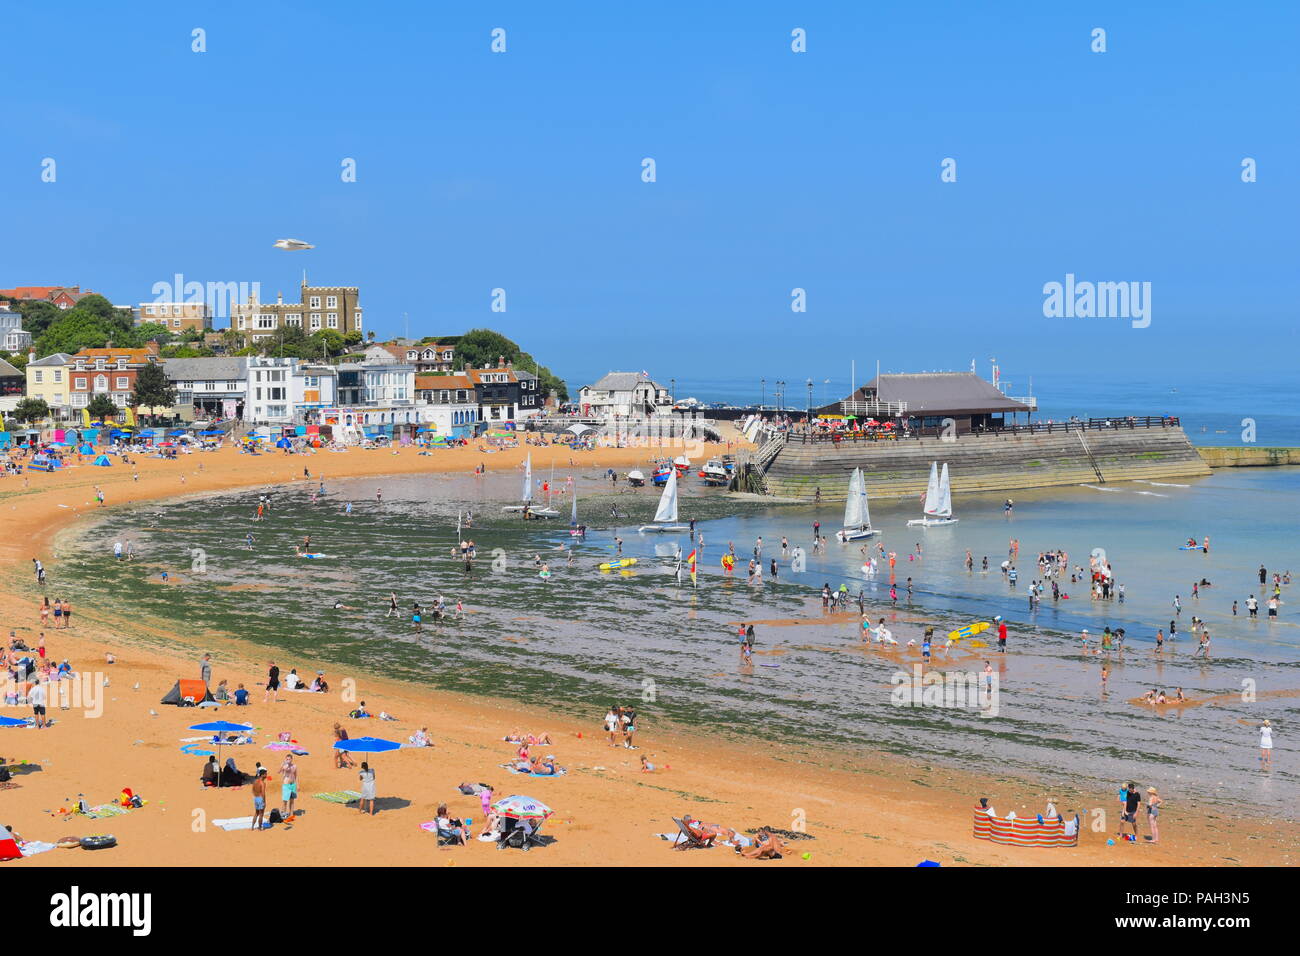 Viking bay beach, tourists and locals during summer heatwave, Broadstairs, Kent, UK, July, 2018 Stock Photo